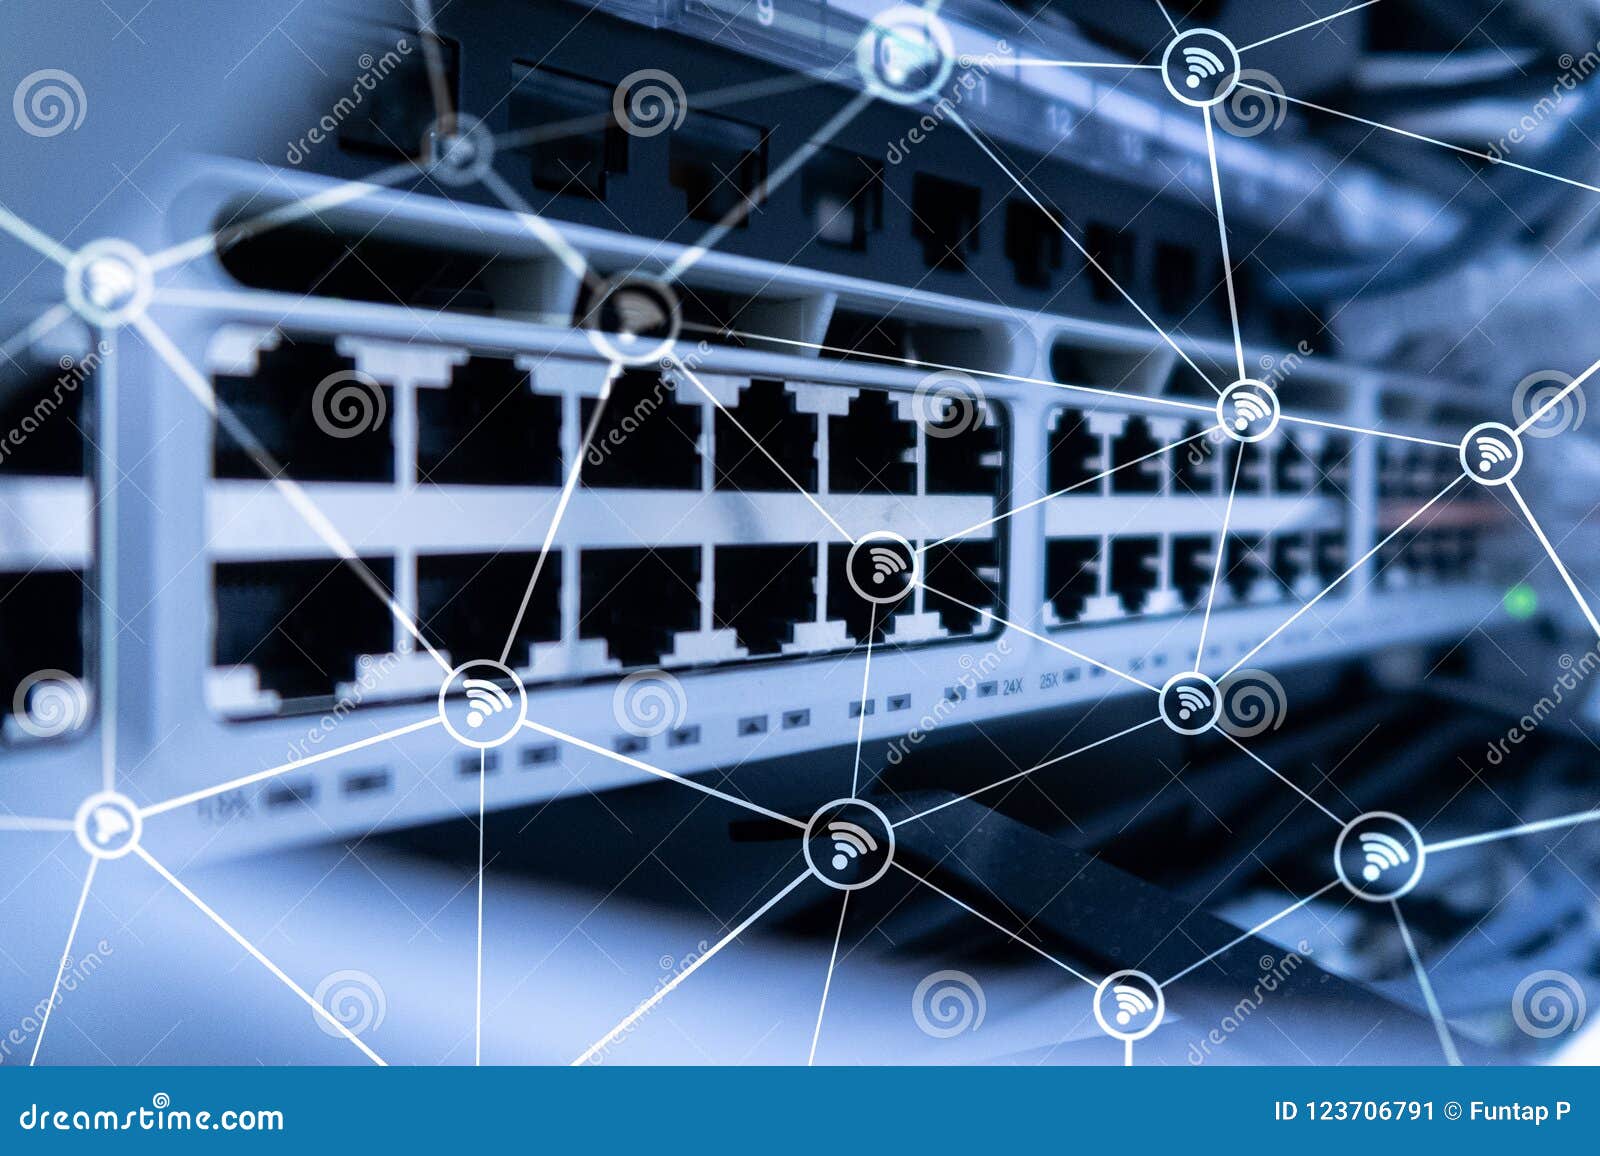 wi fi network abstract structure on modern server room background